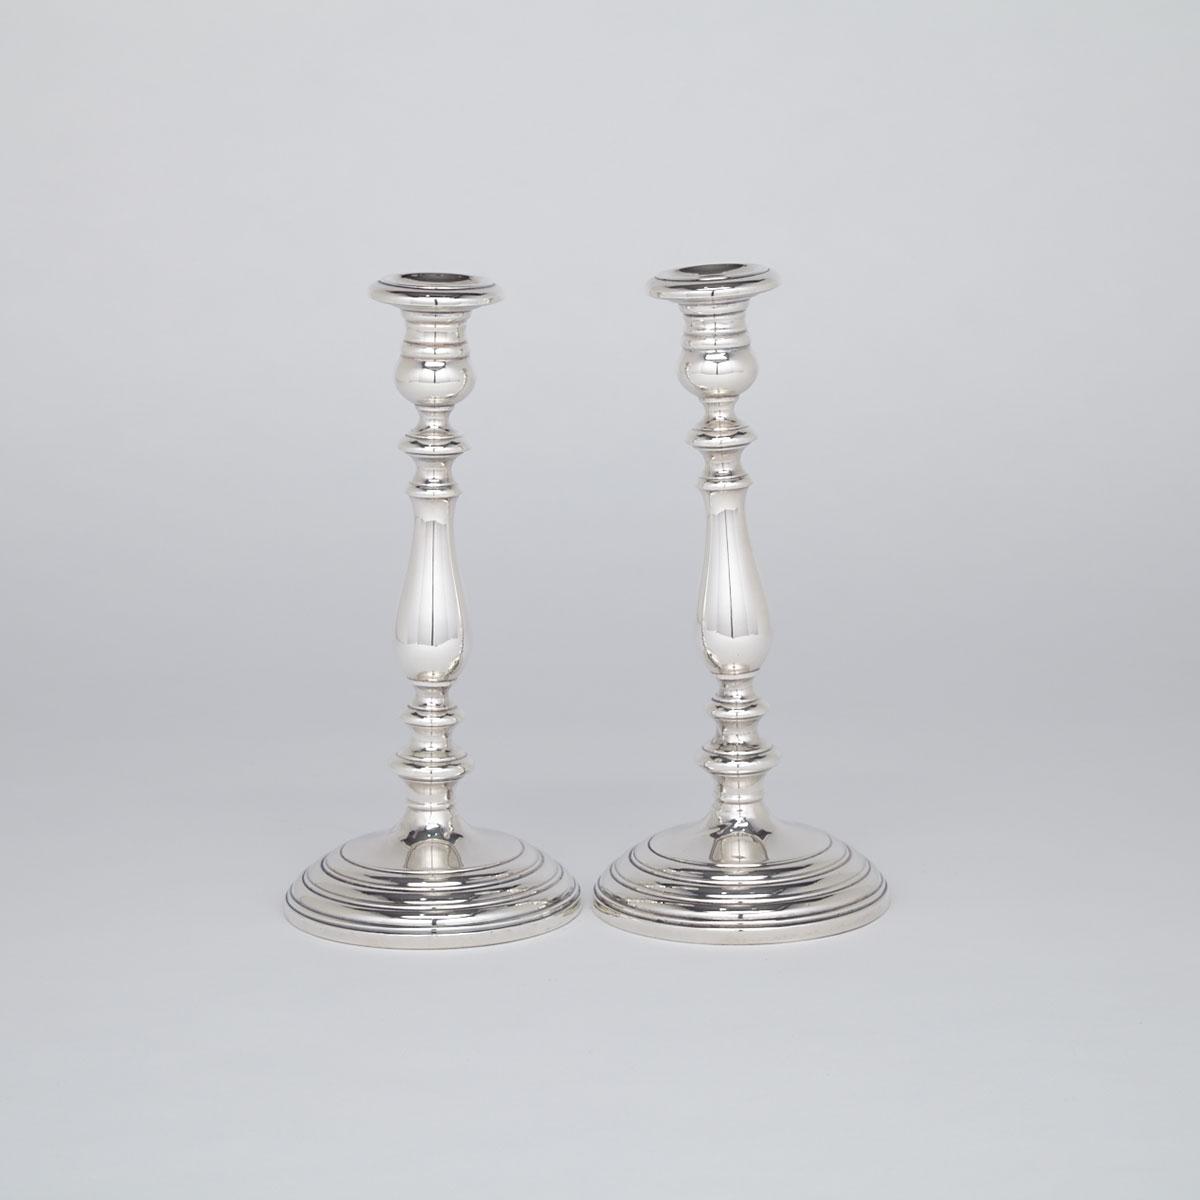 Pair of American Silver Candlesticks, Gorham Mfg. Co., Providence, R.I., 20th Century